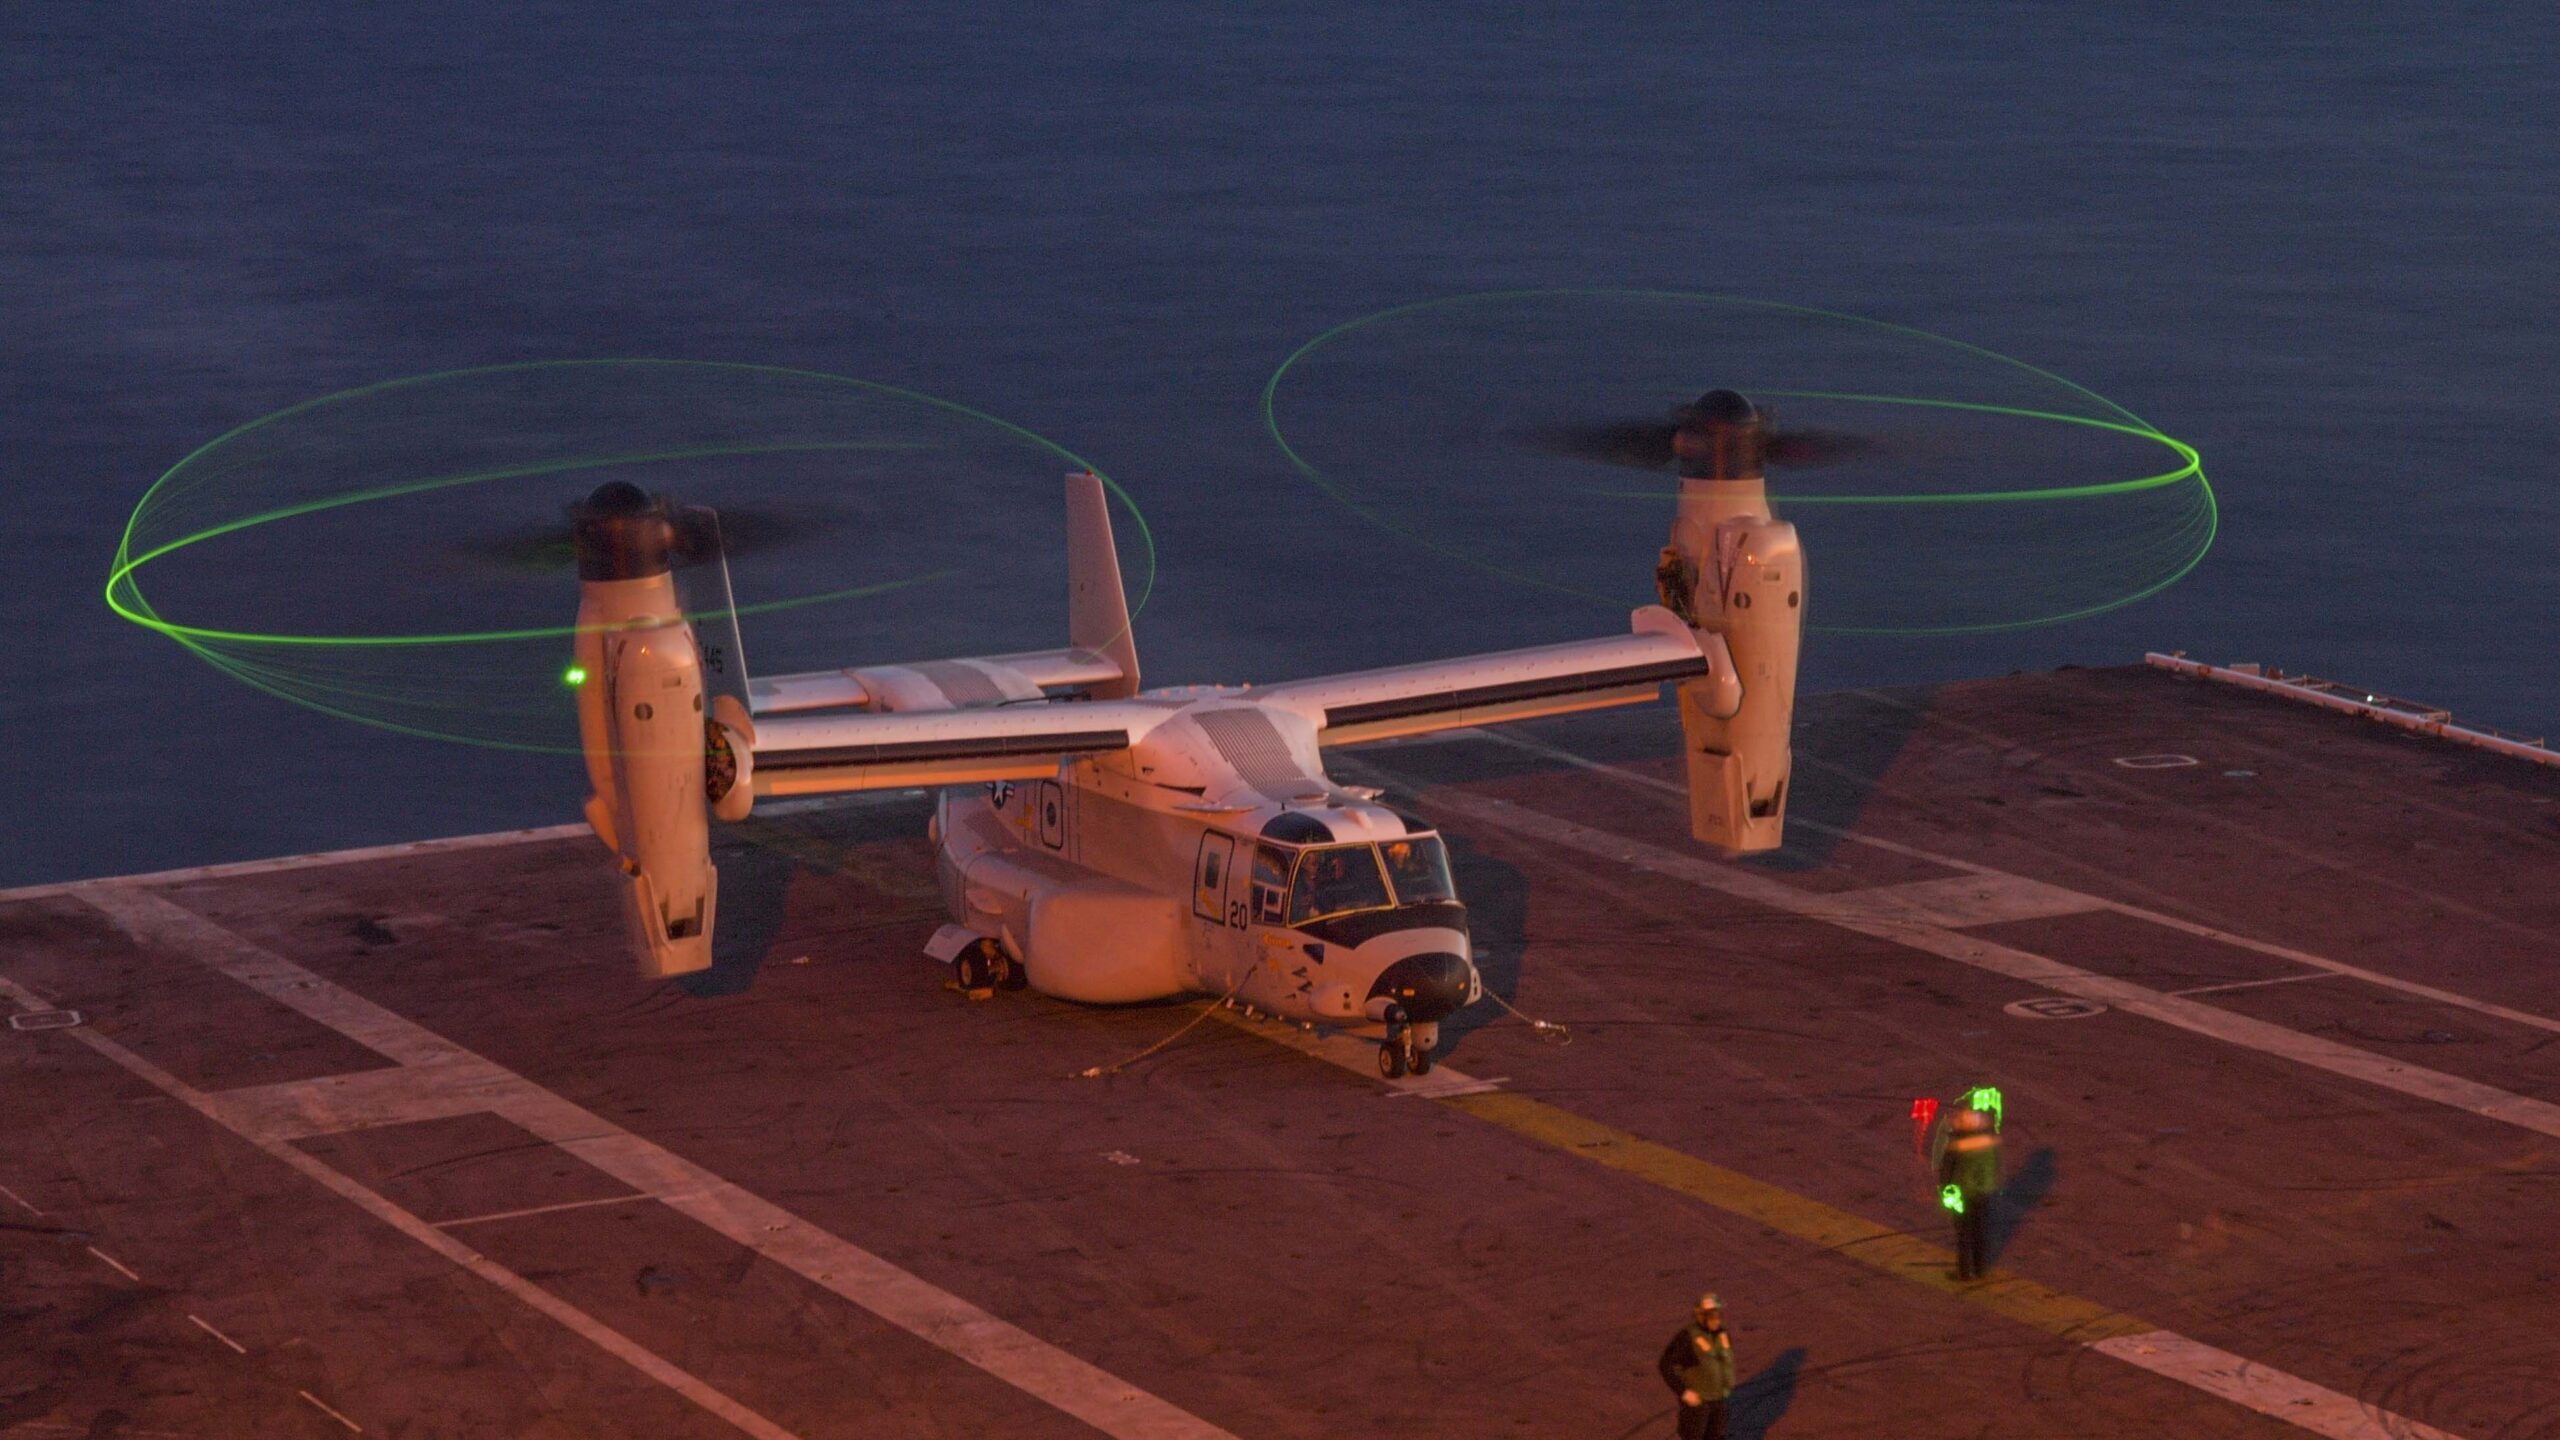 V-22 Osprey operating with ‘limited envelope,’ required to stay near airfields